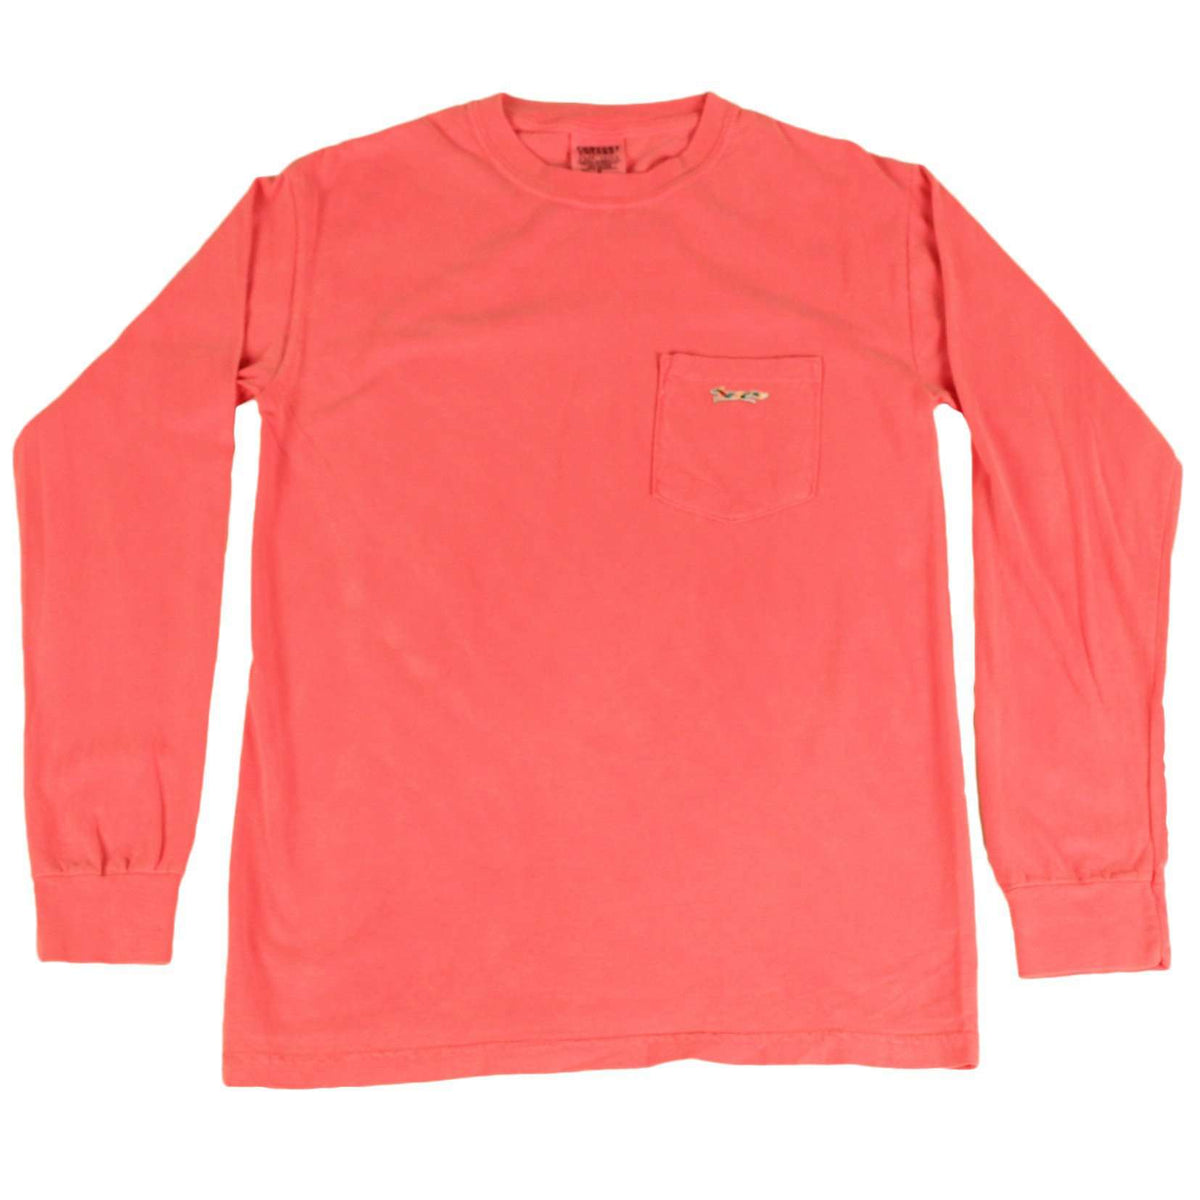 Longshanks Sewn Patch Long Sleeve Pocket Tee Shirt in Crunchberry by Country Club Prep - Country Club Prep